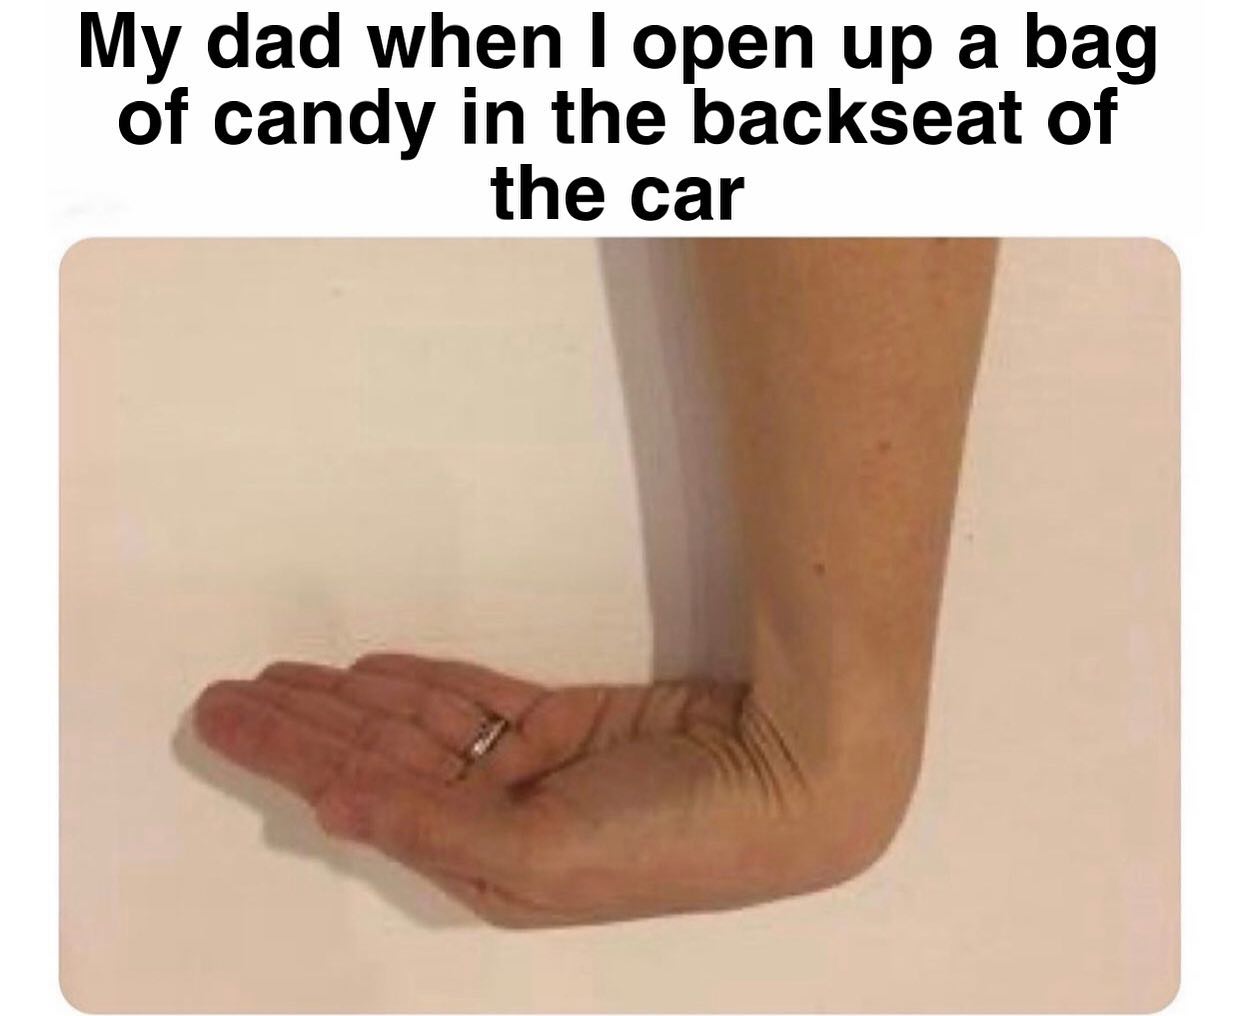 dank memes - sign - My dad when I open up a bag of candy in the backseat of the car